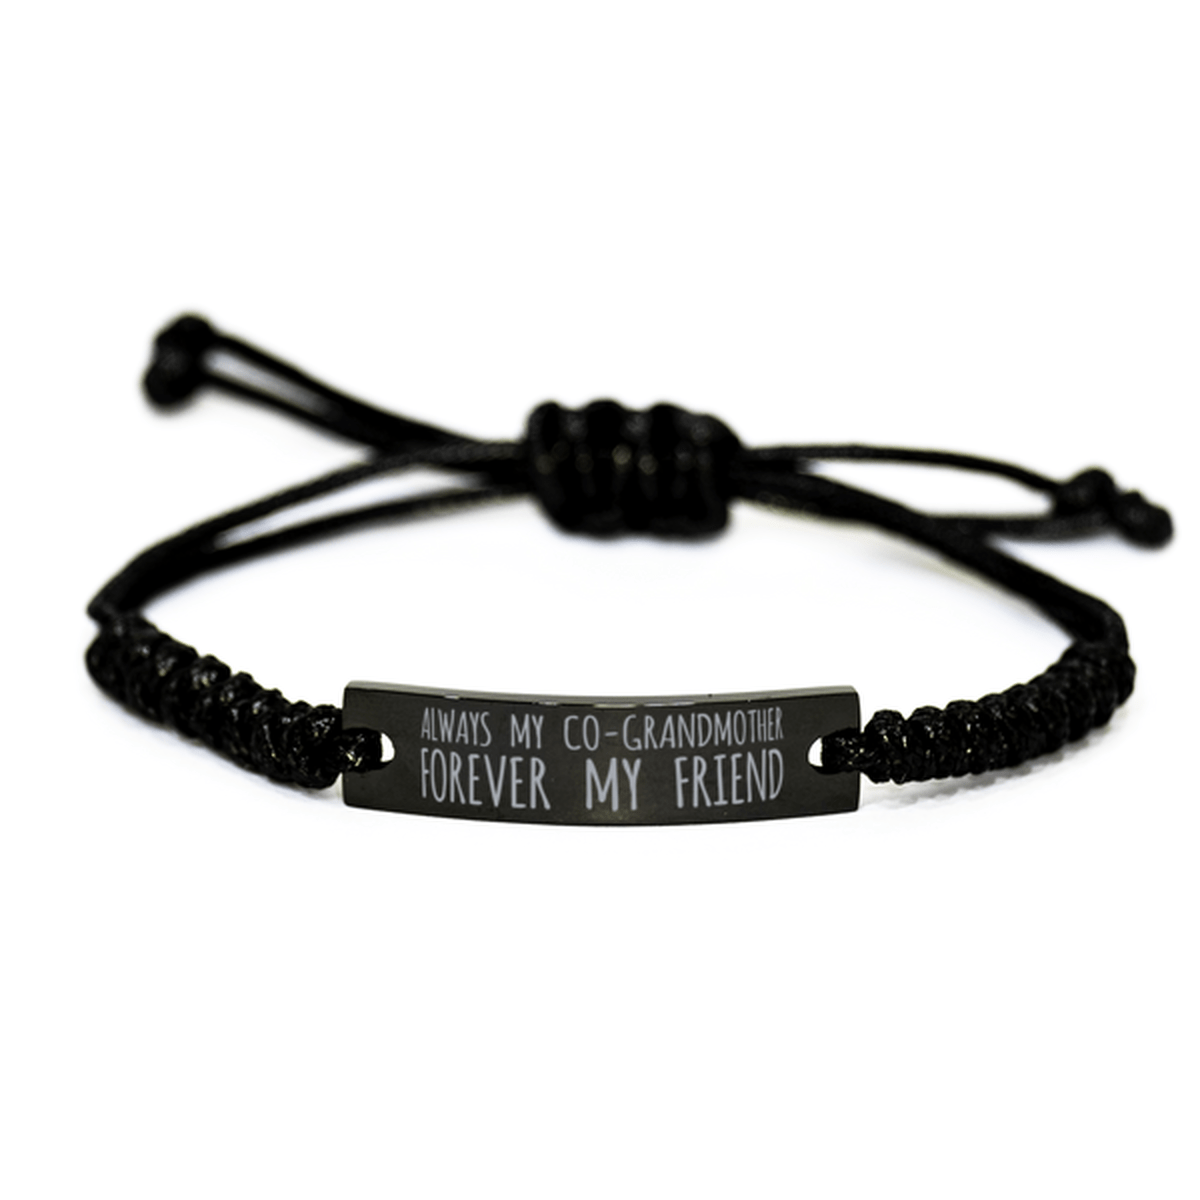 Inspirational Co-Grandmother Black Rope Bracelet, Always My Co-Grandmother Forever My Friend, Best Birthday Gifts For Family